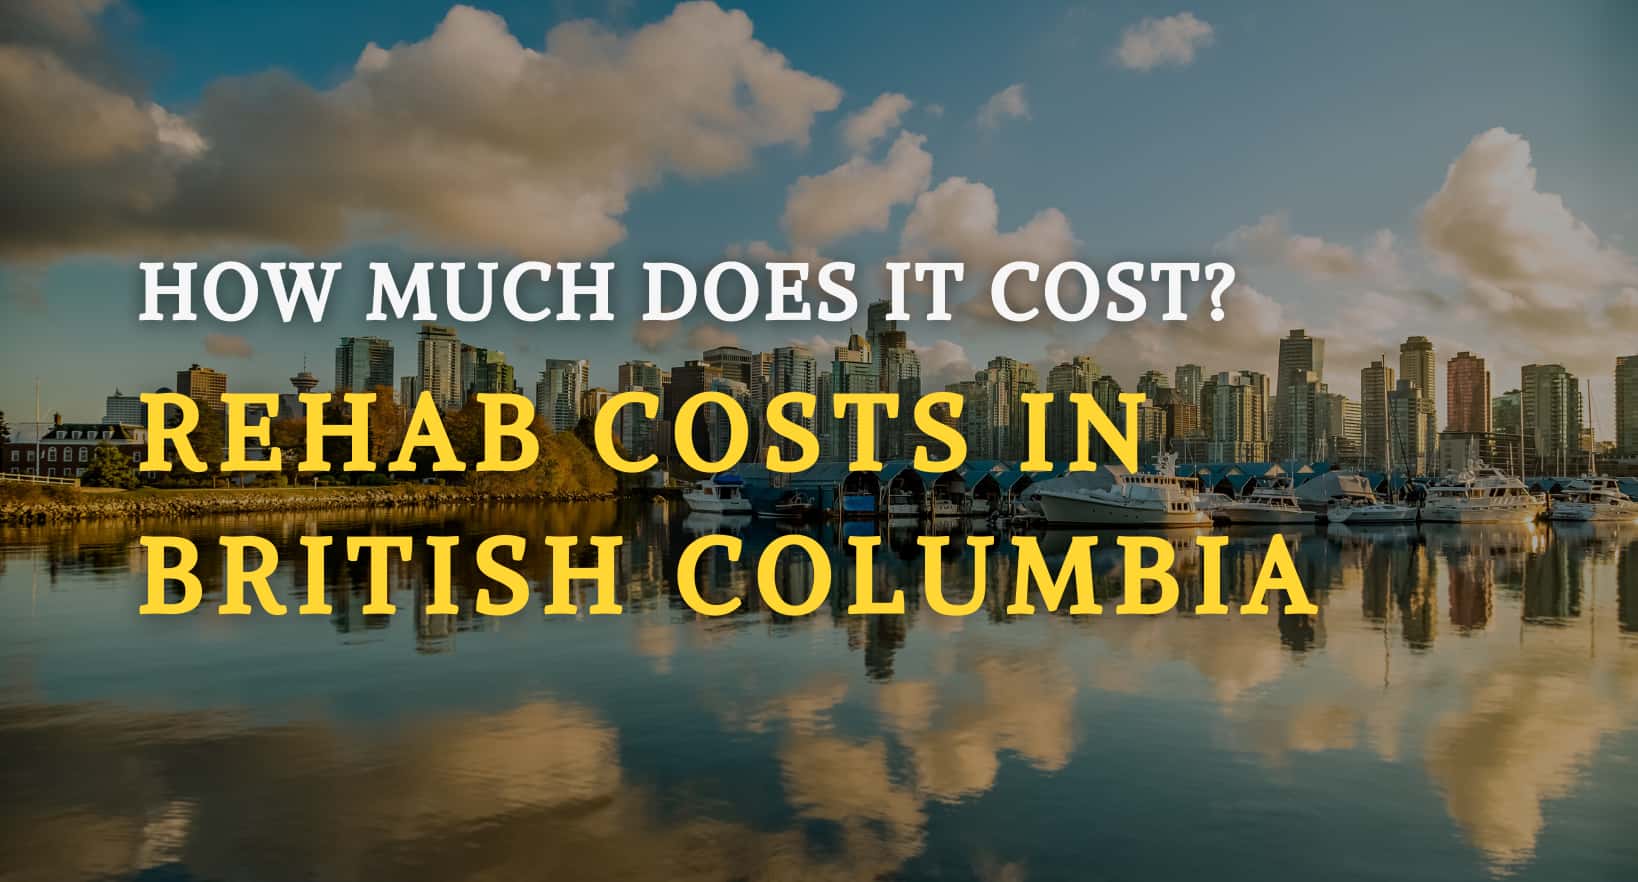 Addiction Rehab Costs may differ in different cities of British Columbia, Canada.